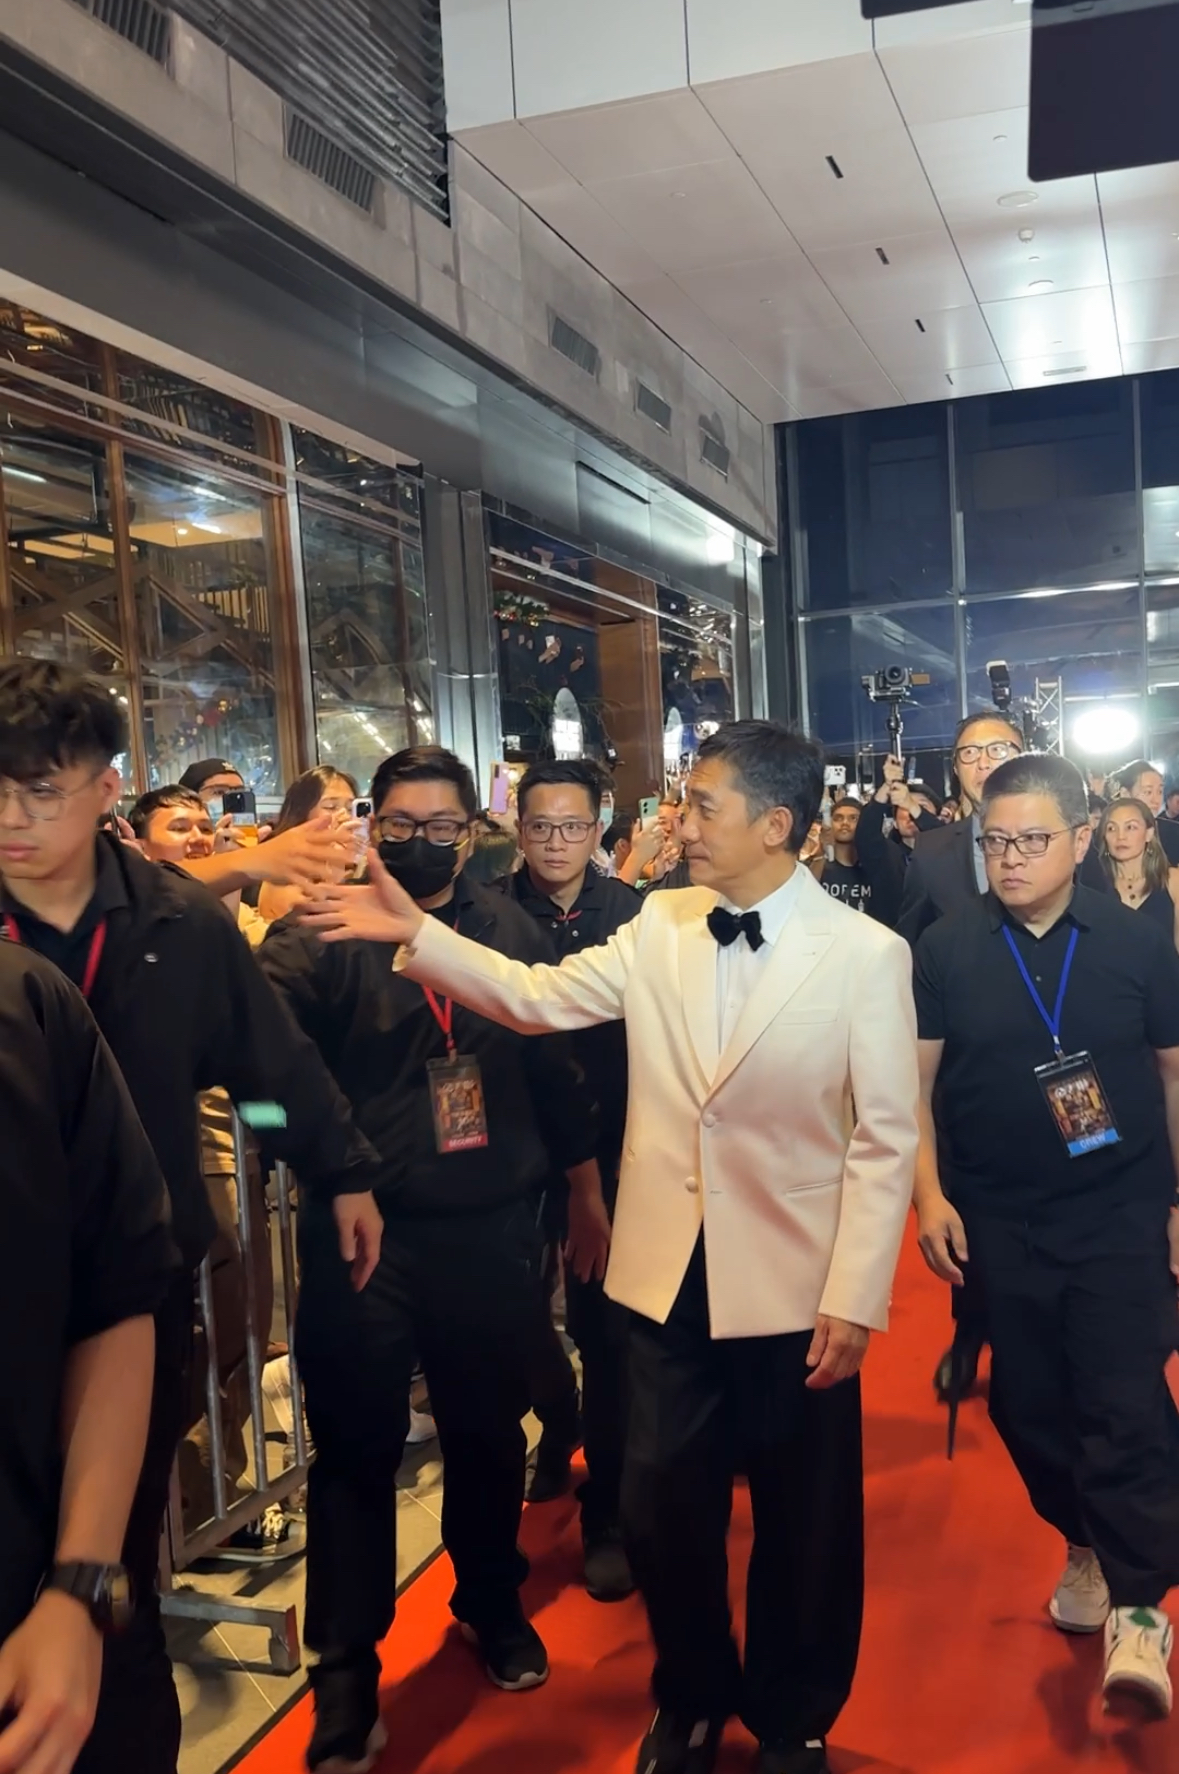 Tony leung on red carpet for gala premiere